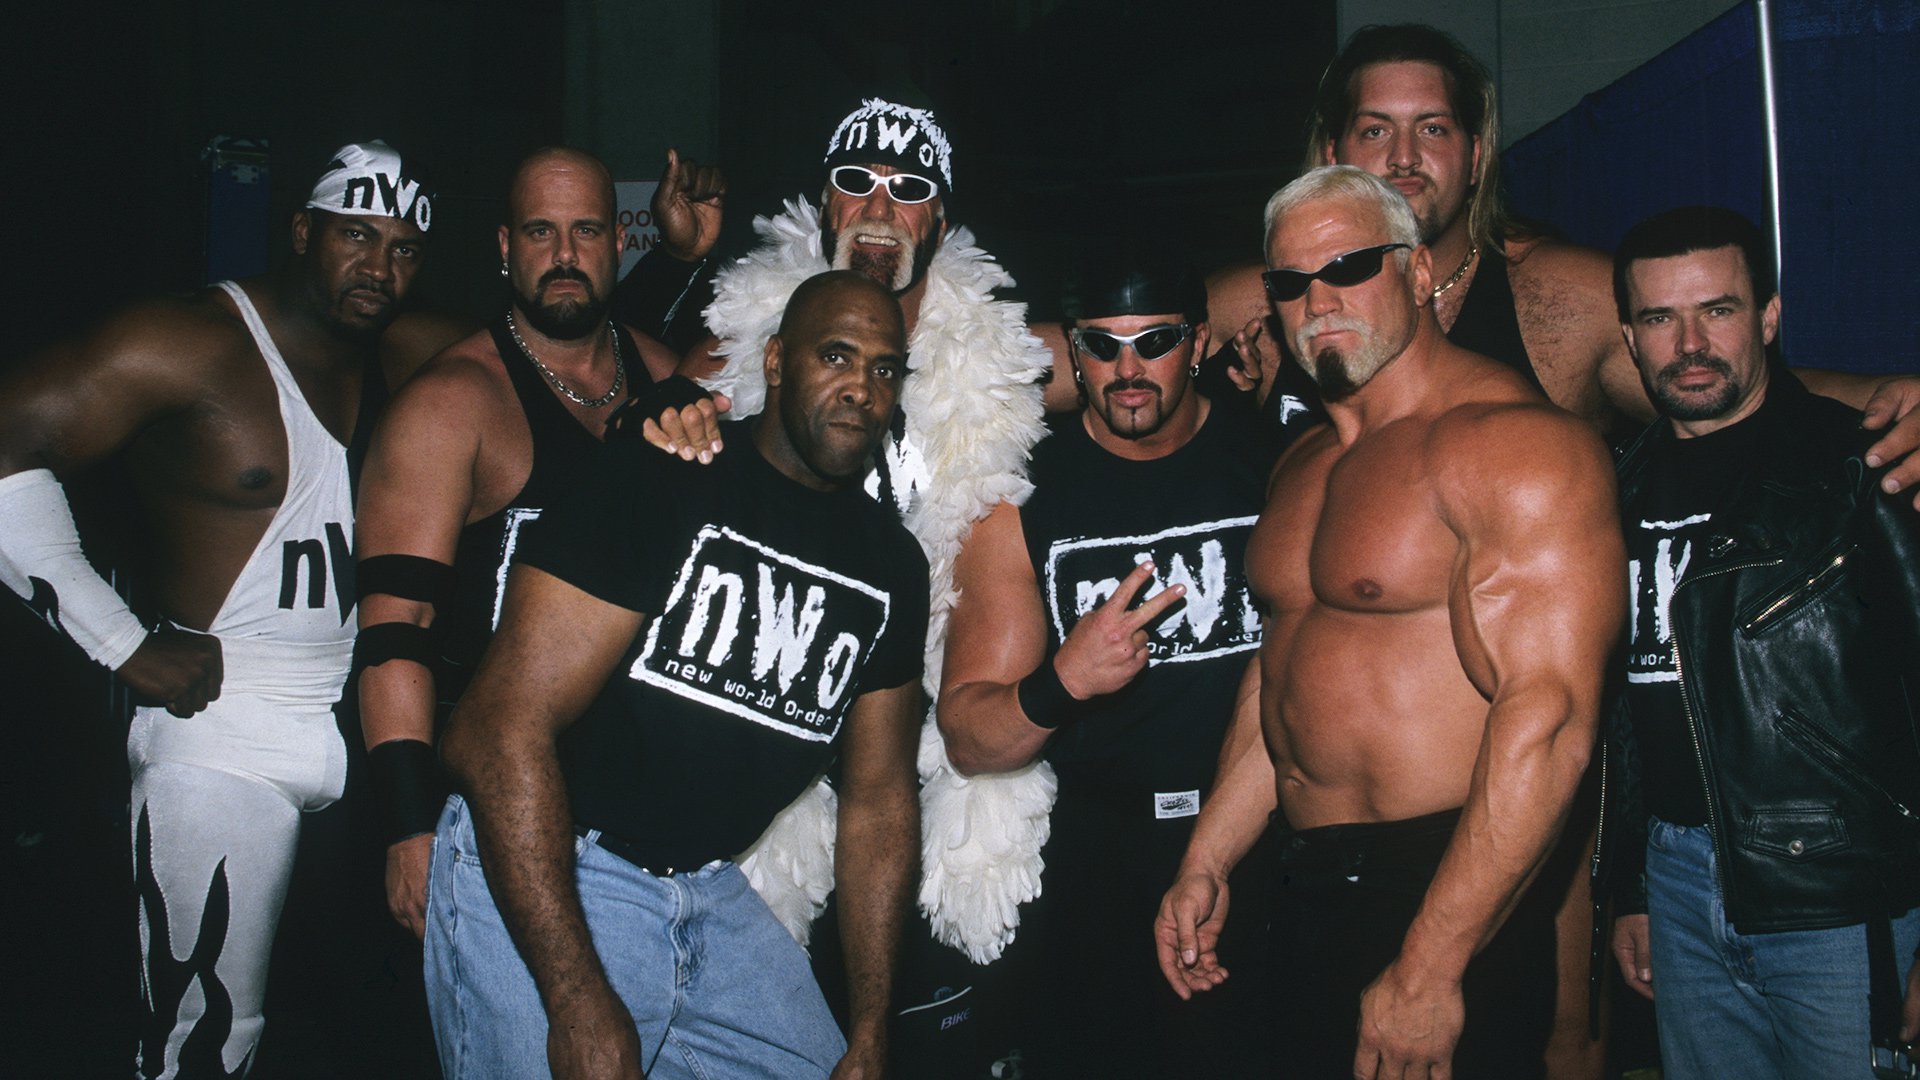 Vincent with the nWo